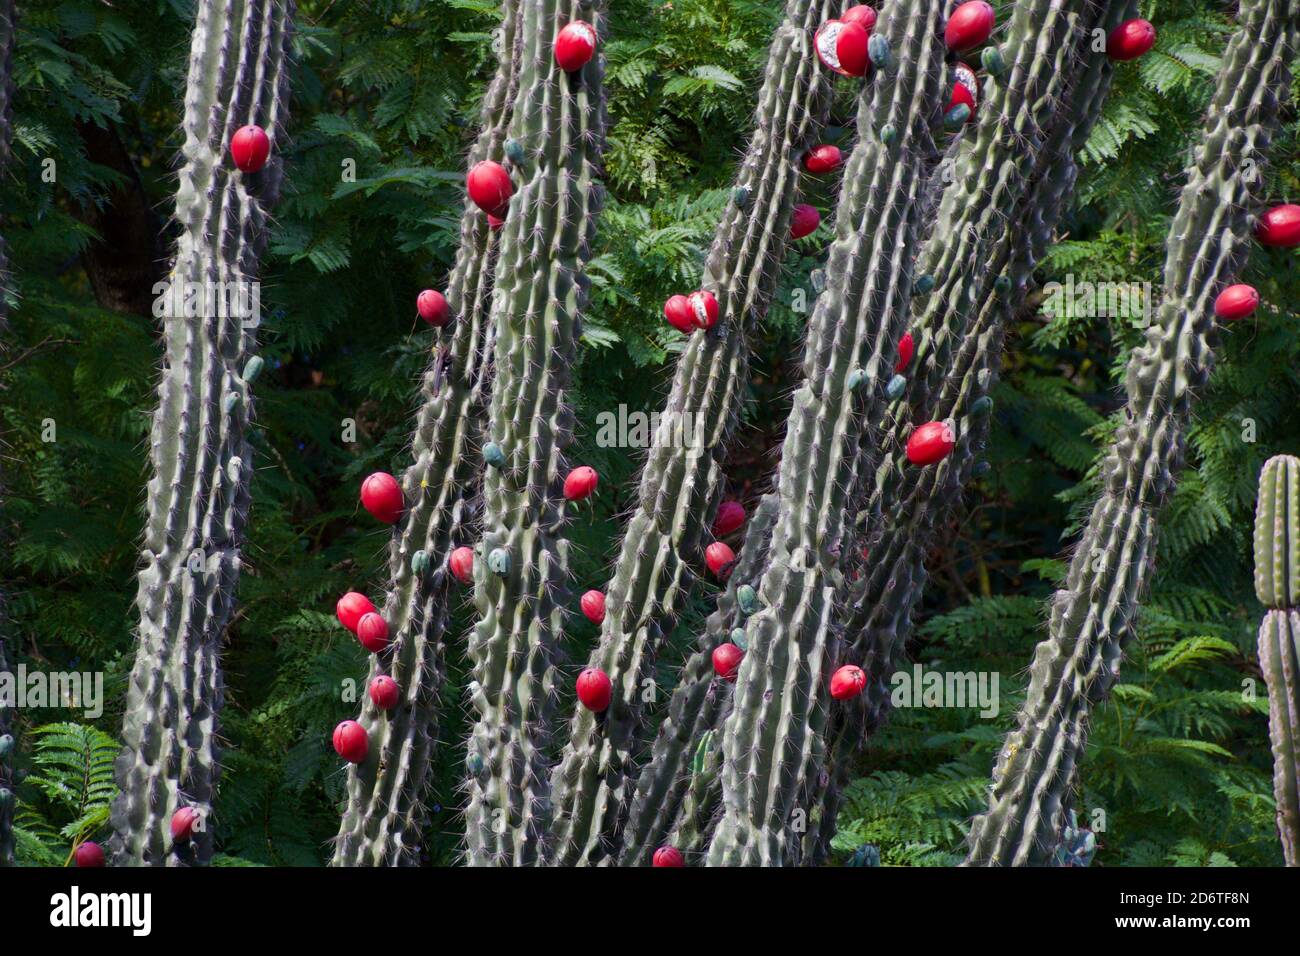 Large green cactus with ripe red fruits. Stock Photo